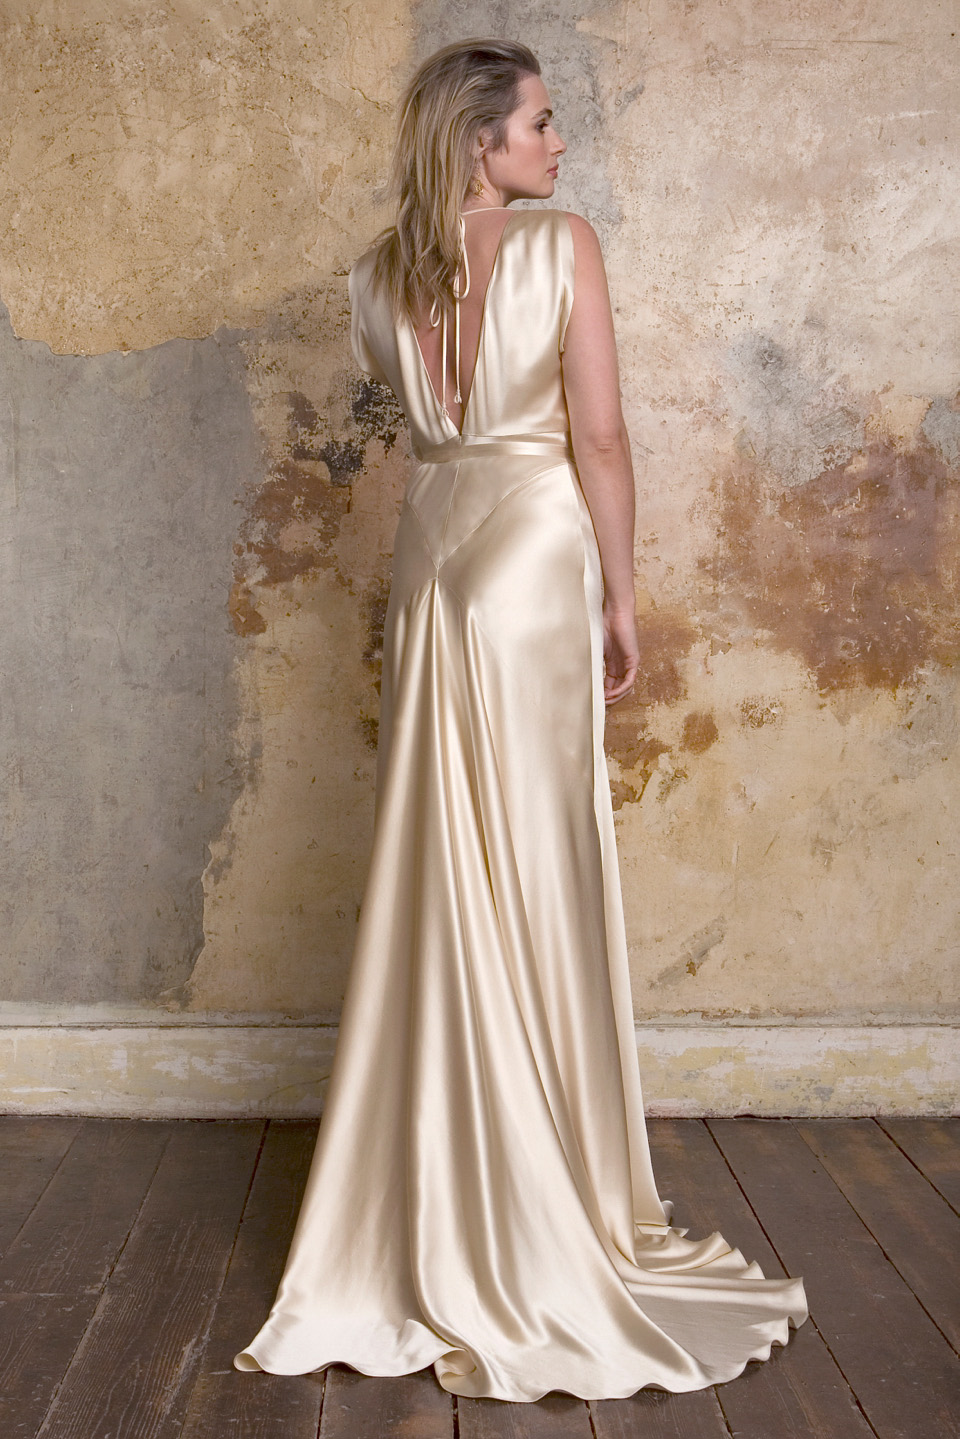 Romantic Vintage Wedding Dresses from Sally Lacock : Chic 